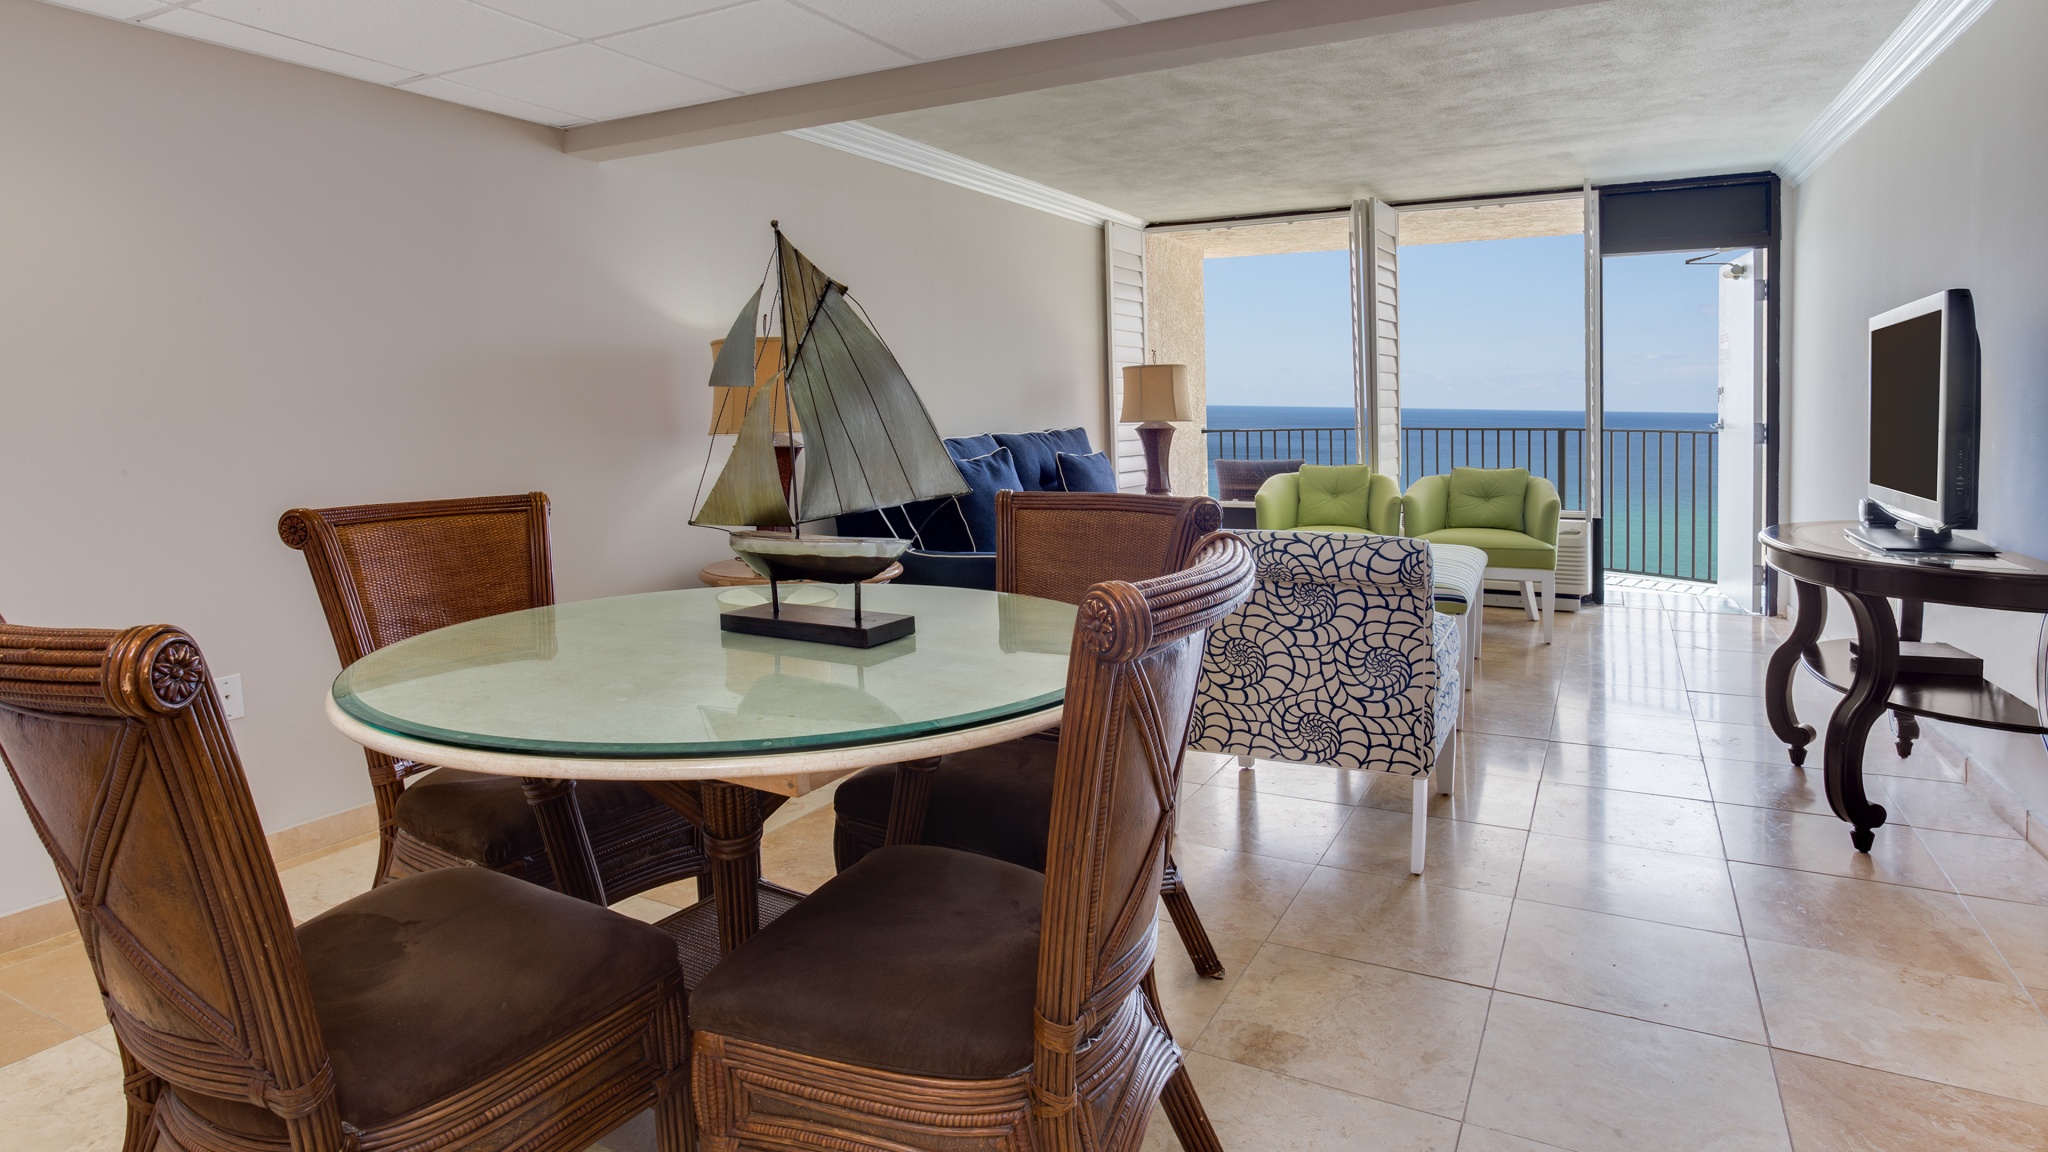 Kitchen table and chairs beside living space and gulf views from floor-to-ceiling windows